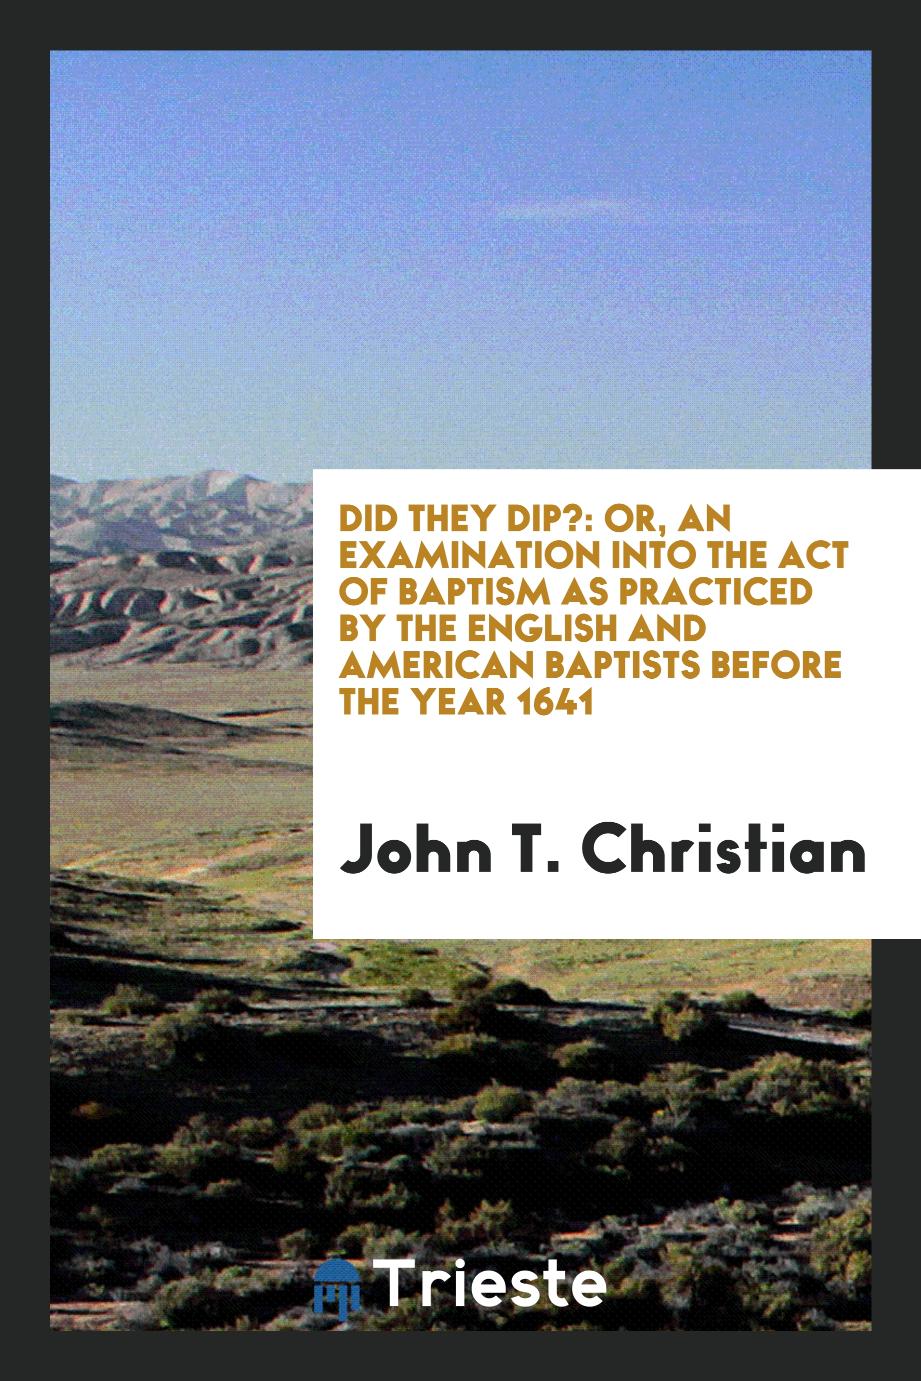 Did they dip?: or, An examination into the act of baptism as practiced by the English and American Baptists before the year 1641